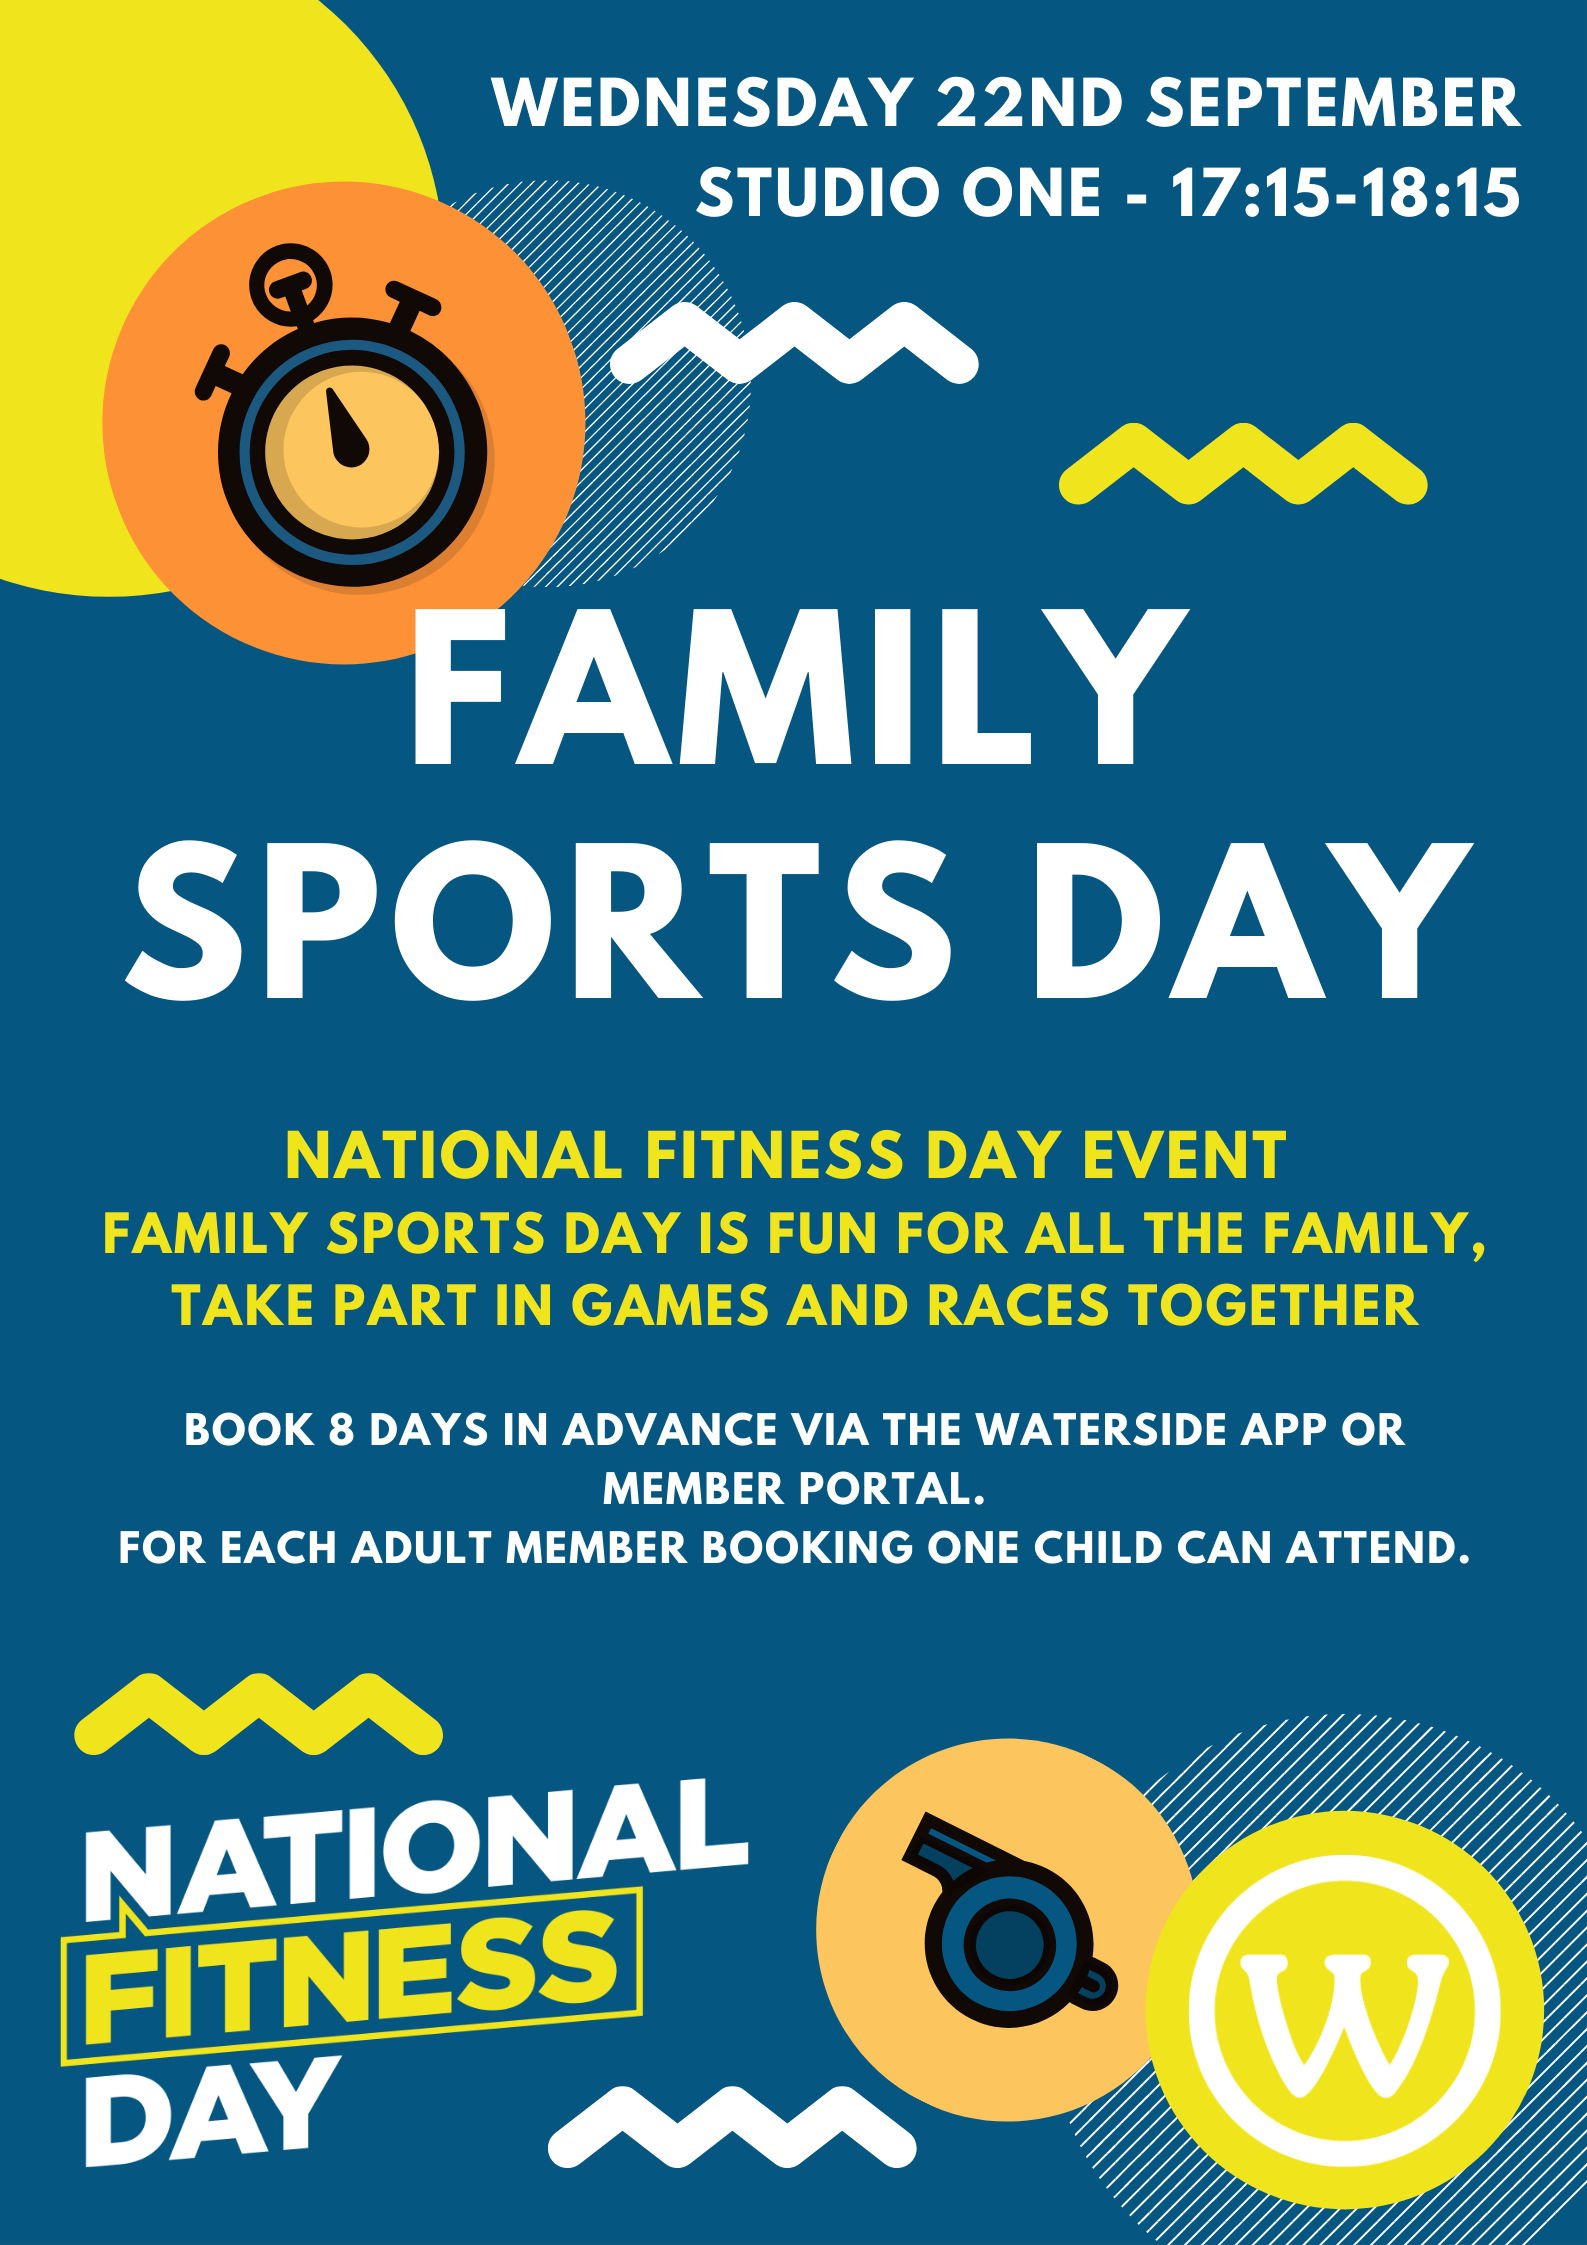 NATIONAL FITNESS DAY FAMILY SPORTS DAY